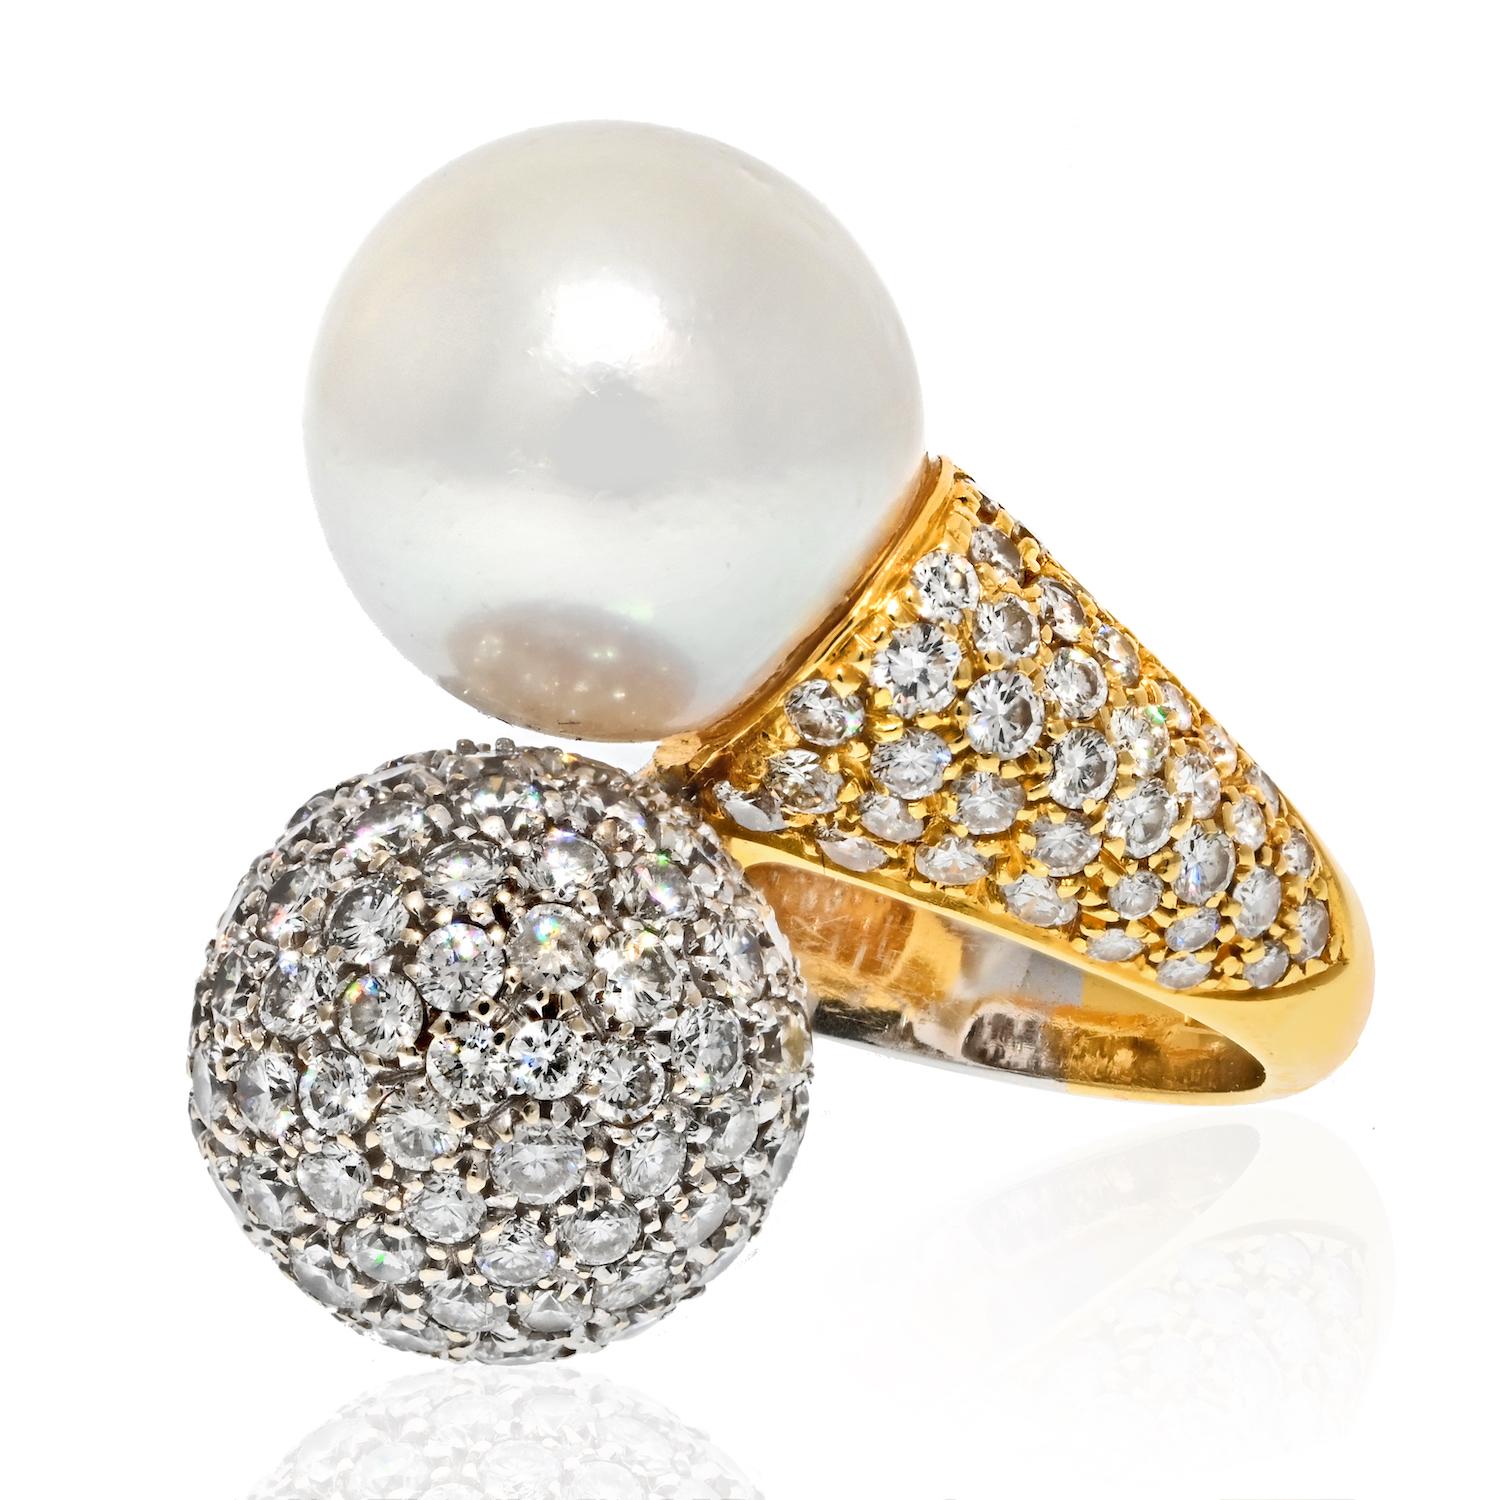 Vintage Bypass Pave Diamond & South Sea White Pearl Gold Ring.
Vintage Bypass Diamond and South Sea Button White Pearl Ring is set in gold mounting. The Bypass design features a Pave set Diamond Ball with 4.50 cts. of Round Brilliant and South Sea